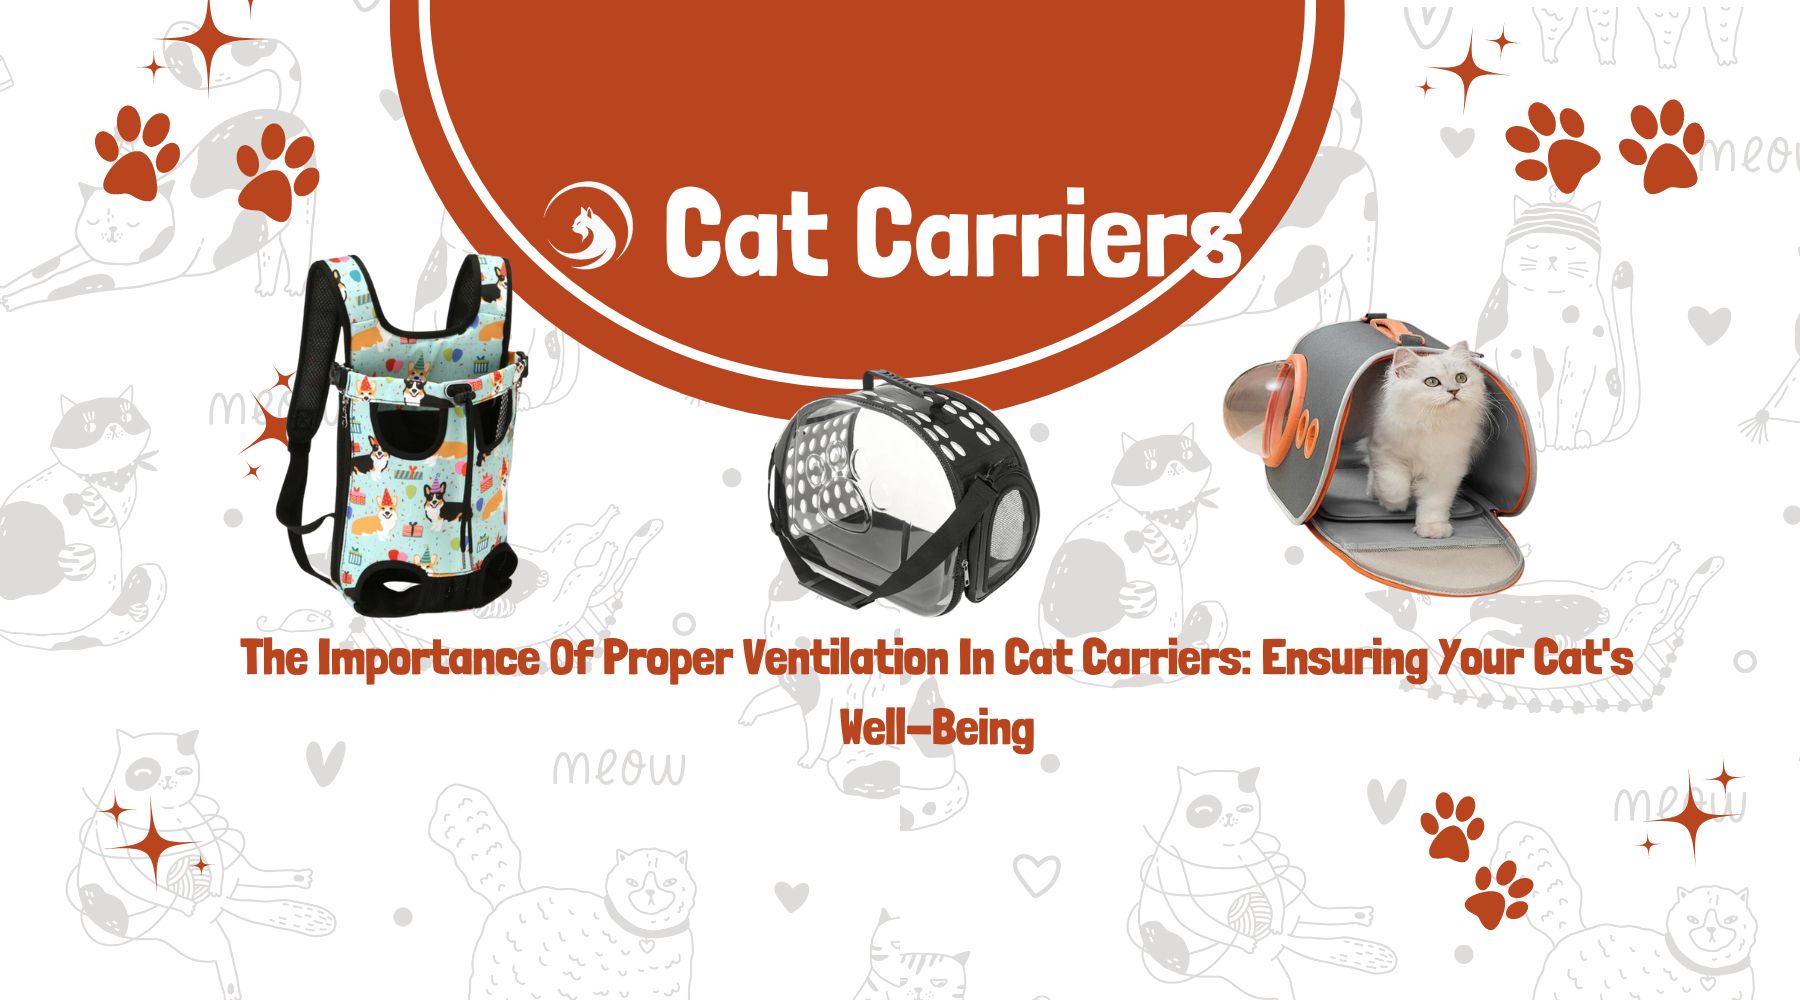 The Importance Of Proper Ventilation In Cat Carriers: Ensuring Your Cat's Well-Being